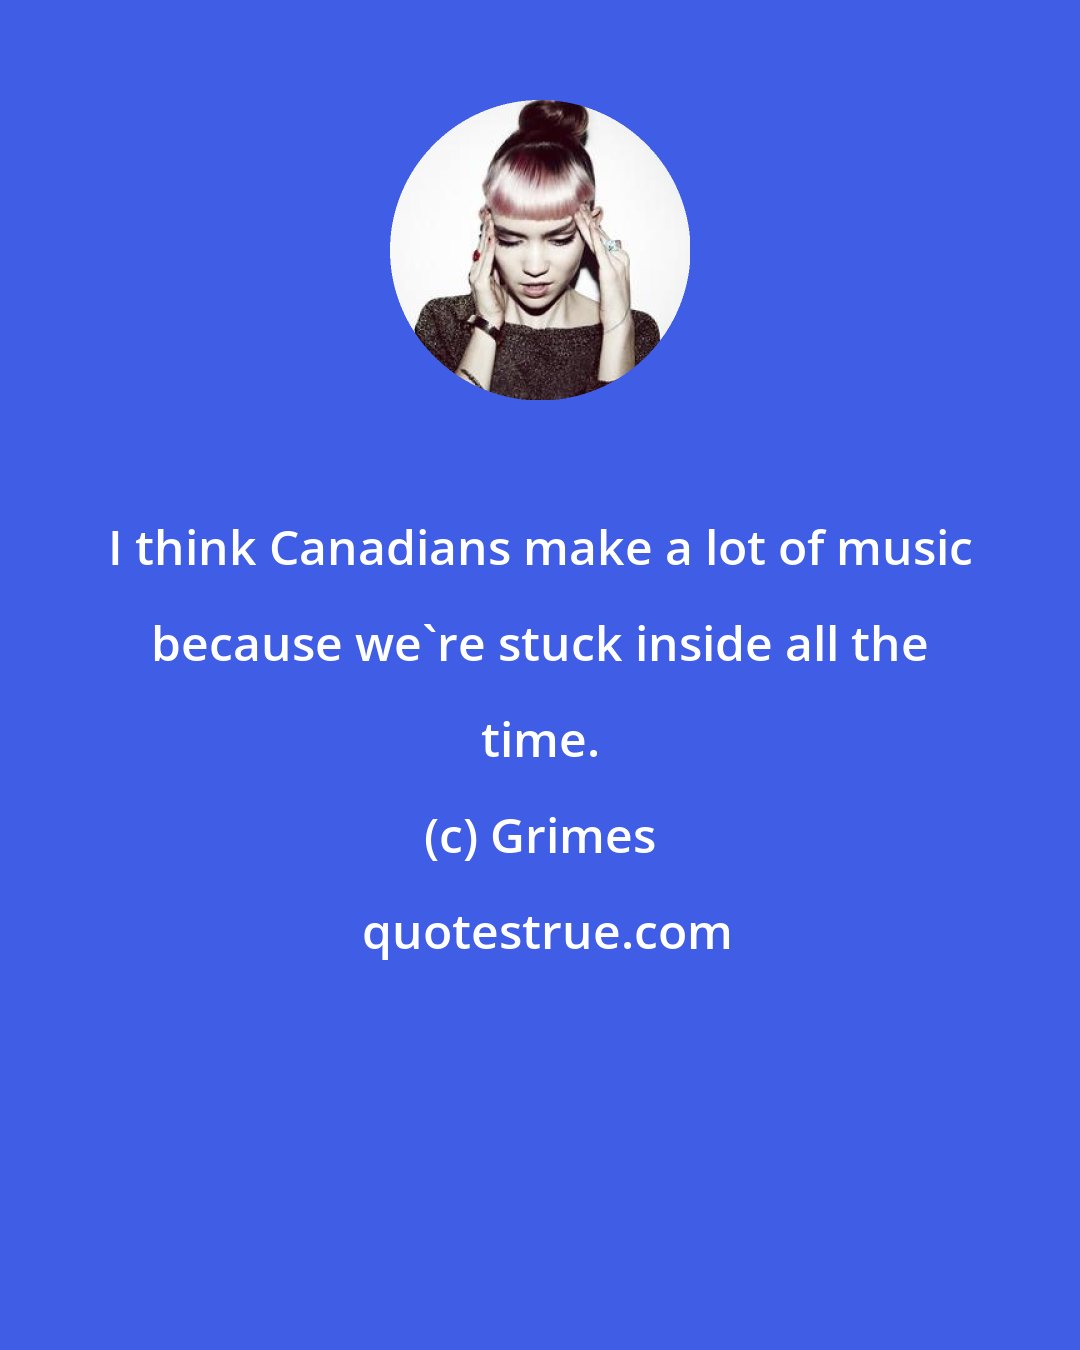 Grimes: I think Canadians make a lot of music because we're stuck inside all the time.